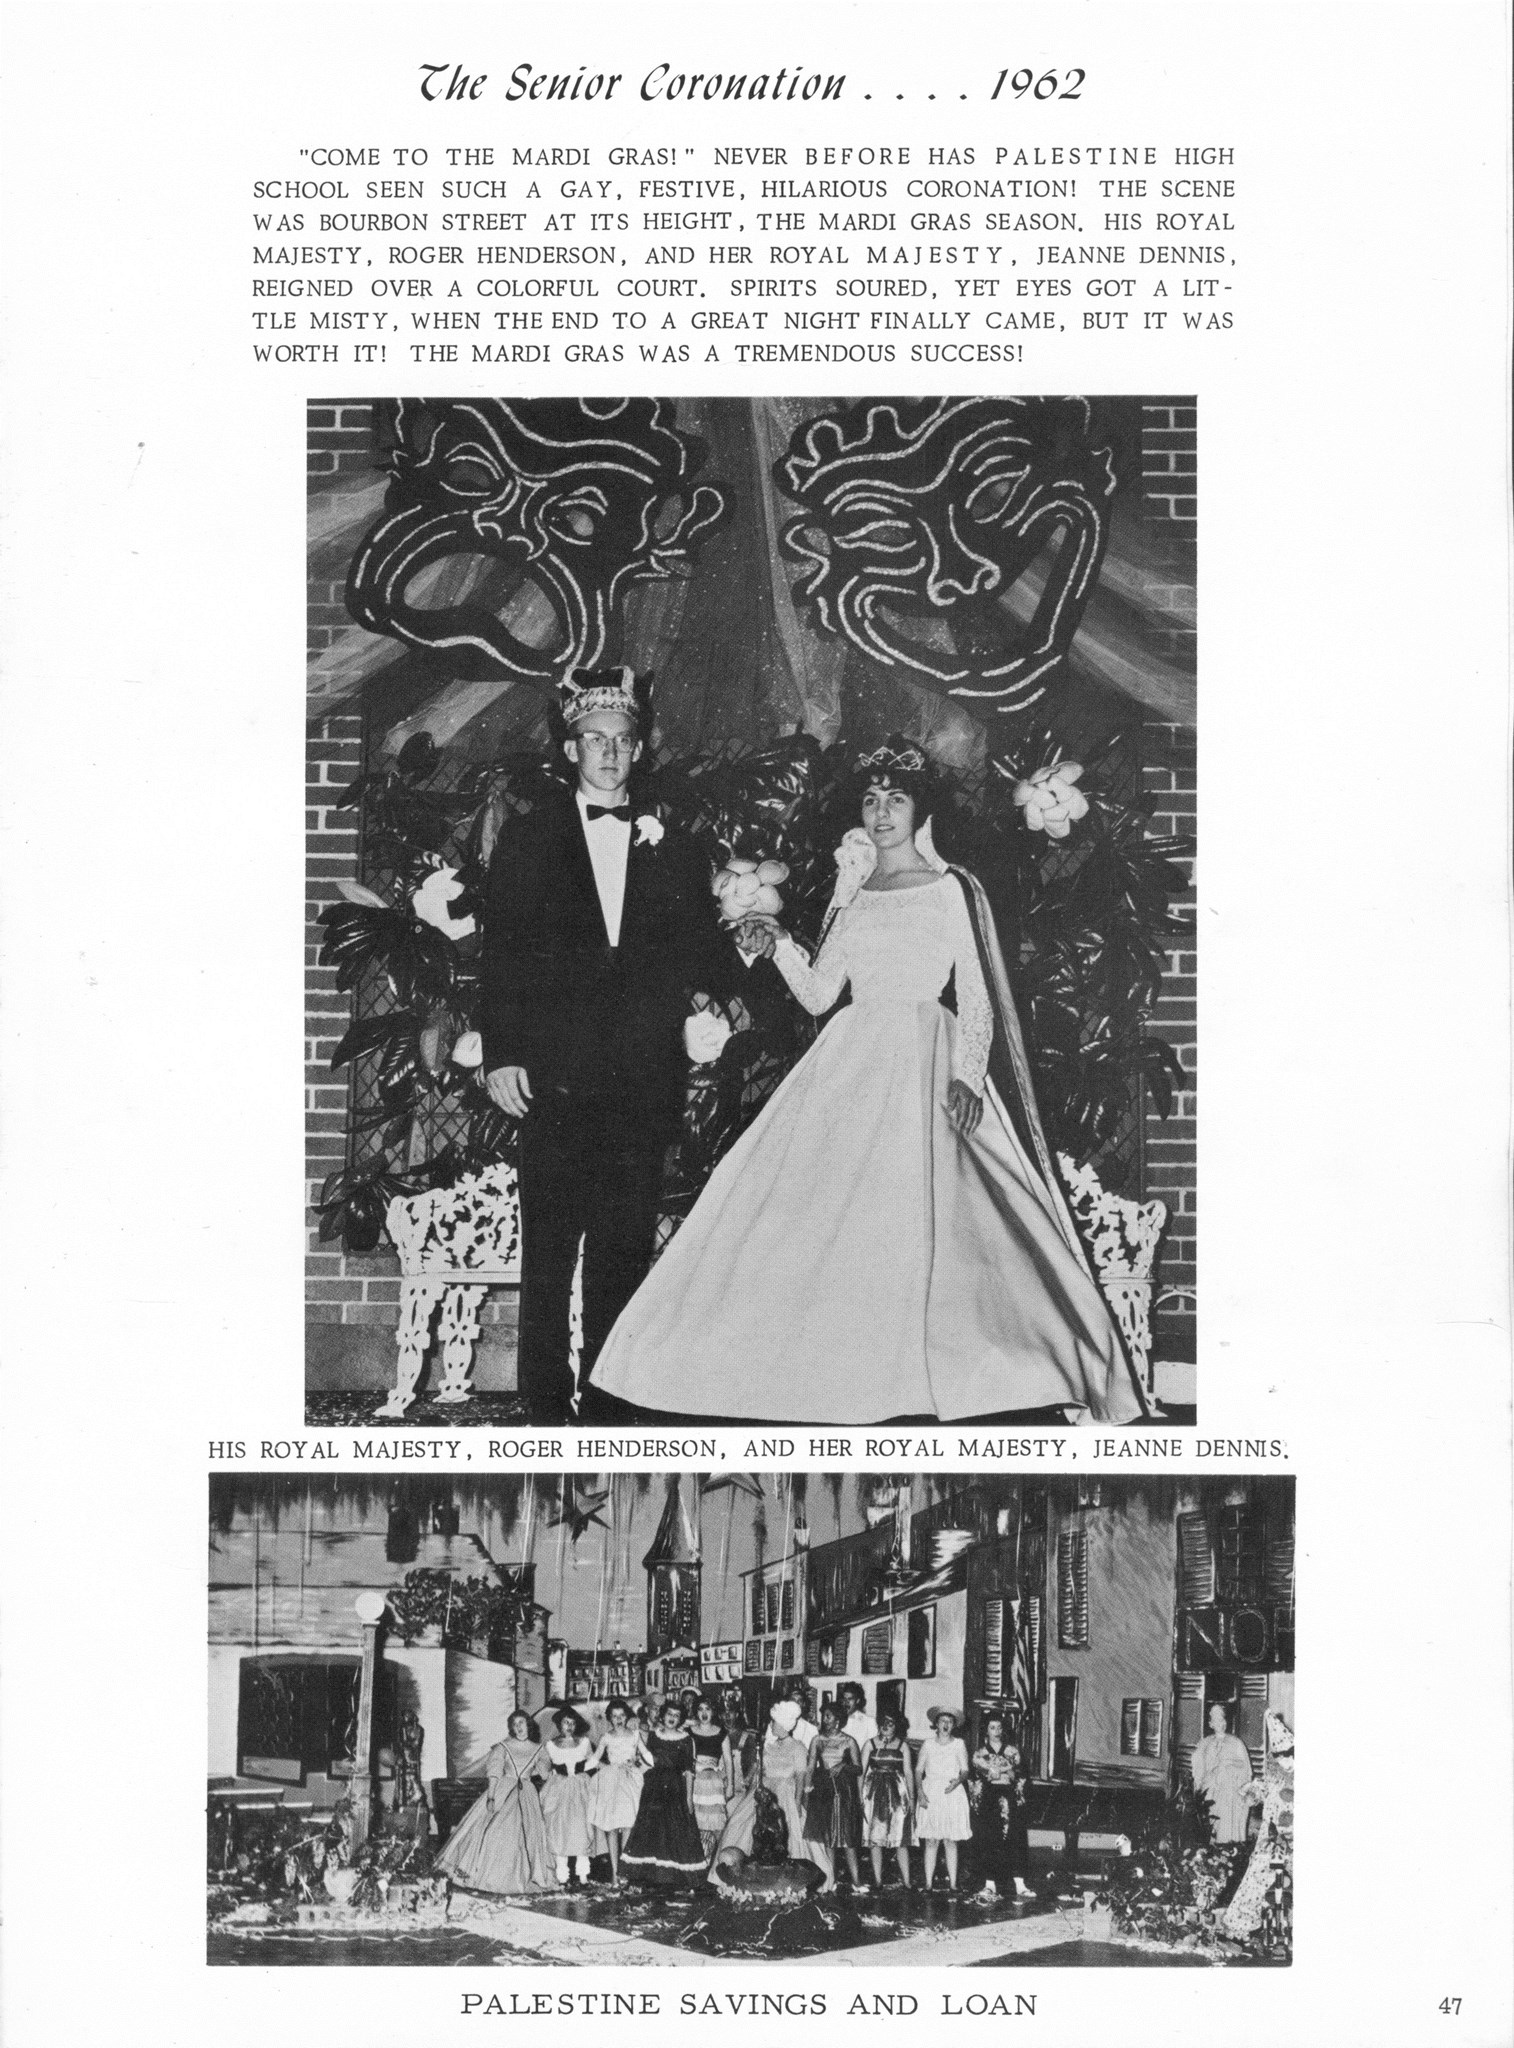 ../../../Images/Large/1962/Arclight-1962-pg0047.jpg